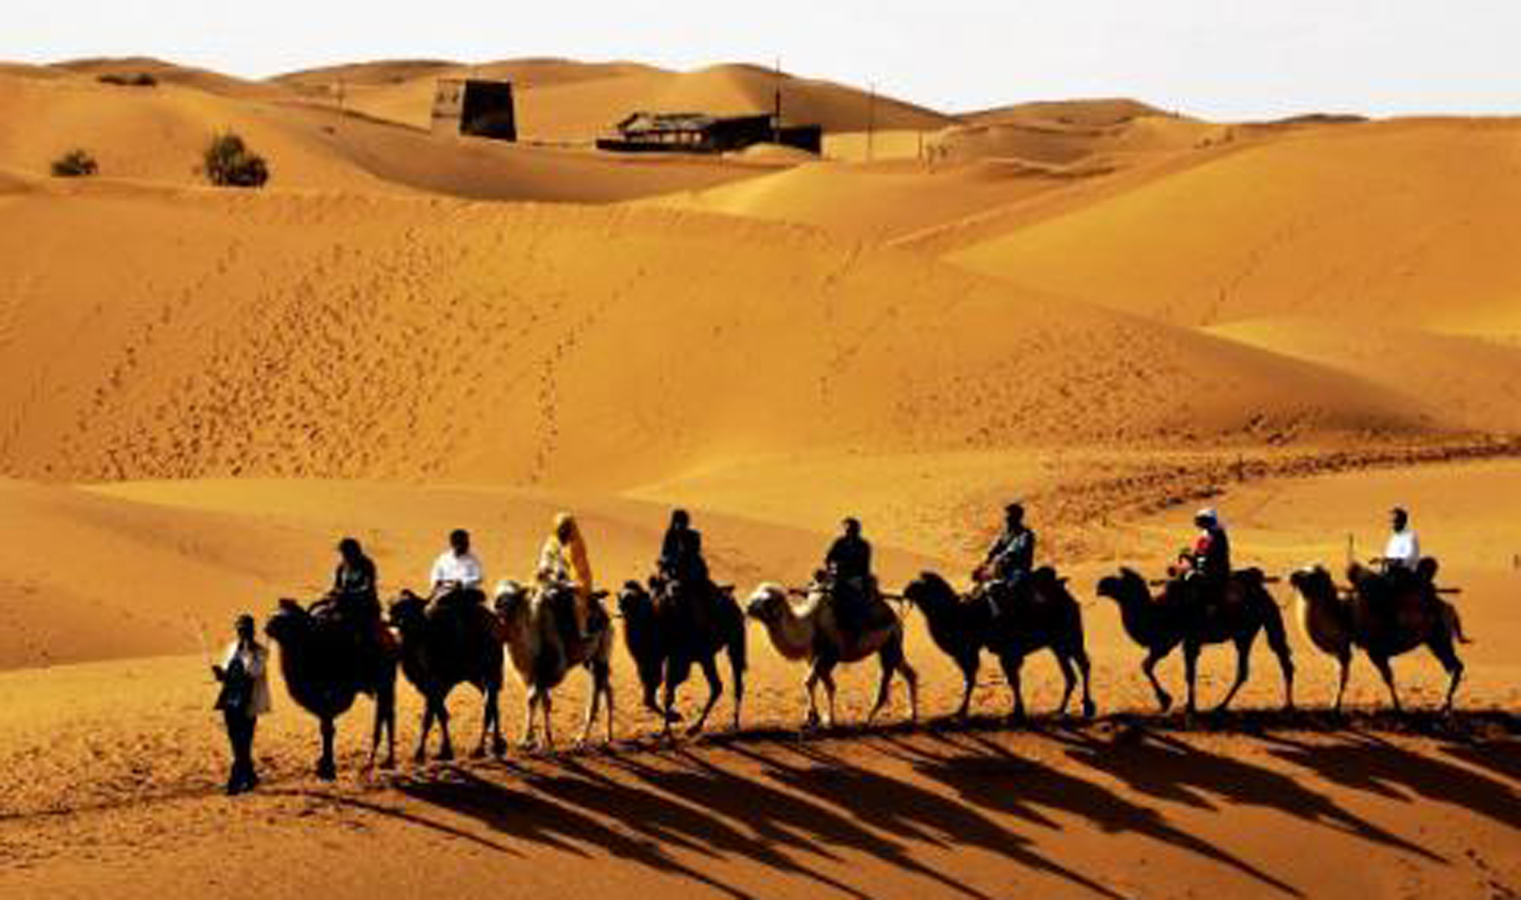 For centuries camels were used to transport people and goods across the 4,000-mile-long Silk Road.